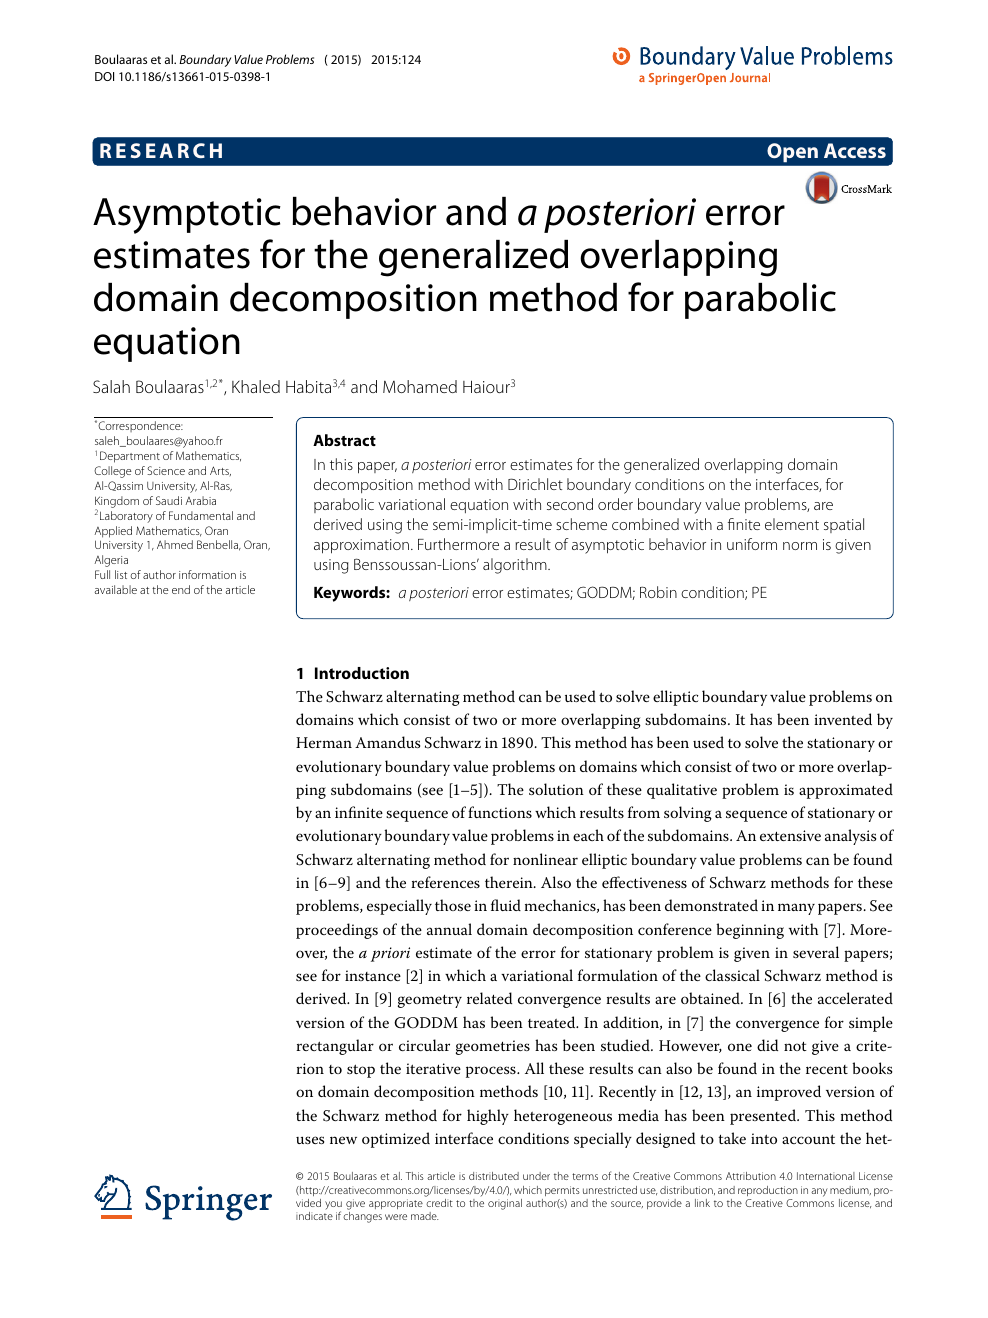 Asymptotic Behavior And A Posteriori Error Estimates For The Generalized Overlapping Domain Decomposition Method For Parabolic Equation Topic Of Research Paper In Mathematics Download Scholarly Article Pdf And Read For Free